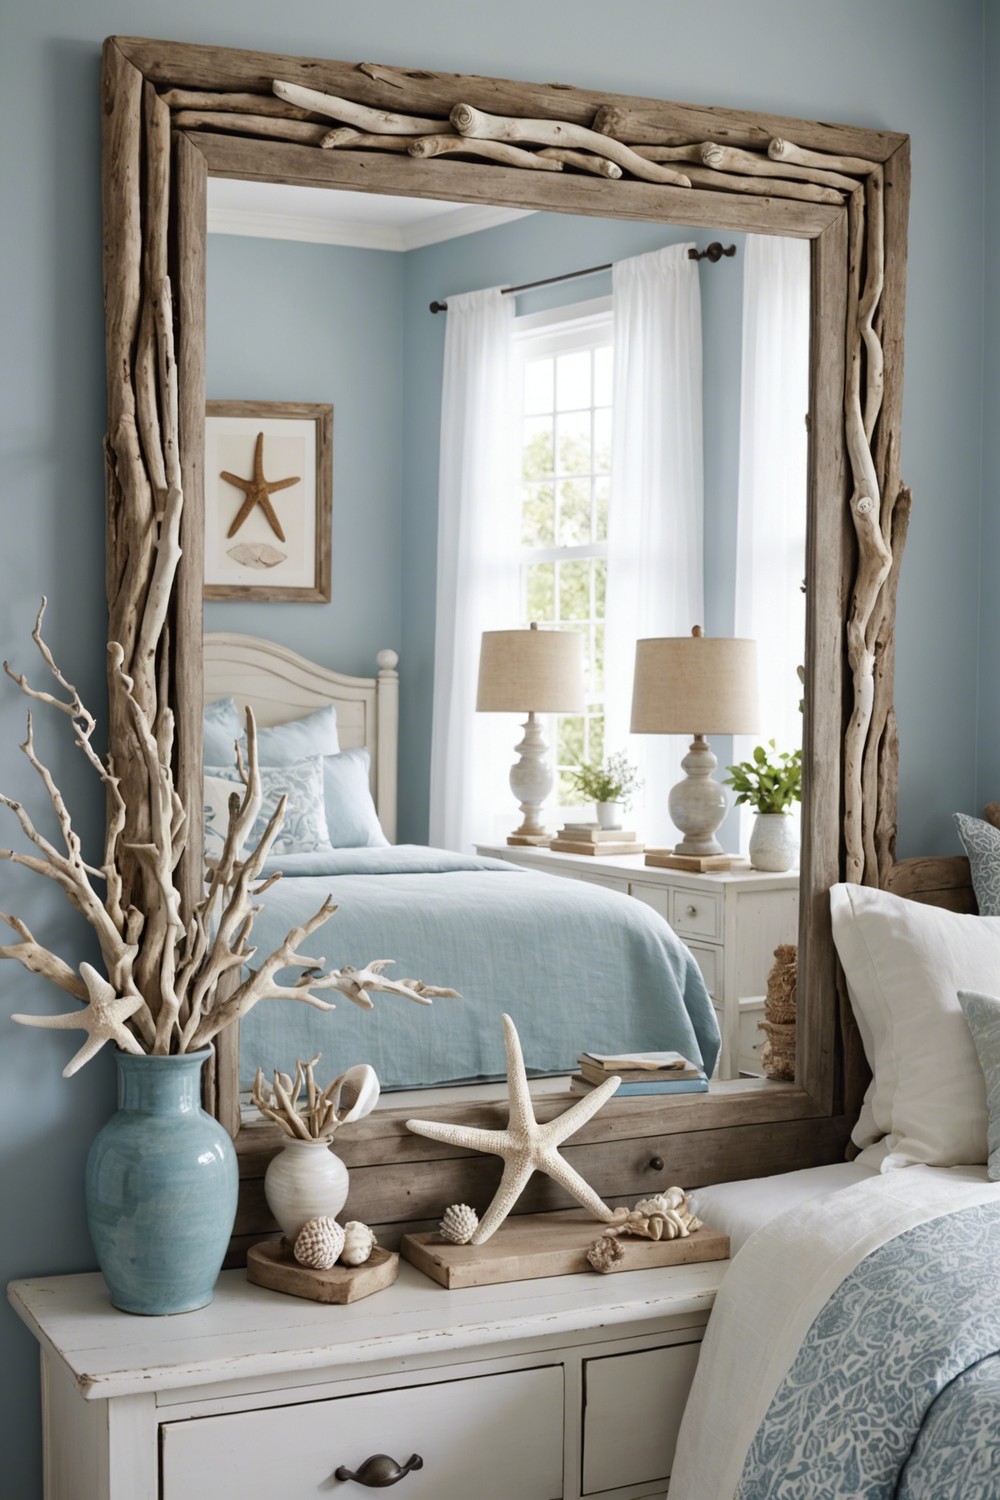 Take Inspiration from the Beach with Driftwood Accents